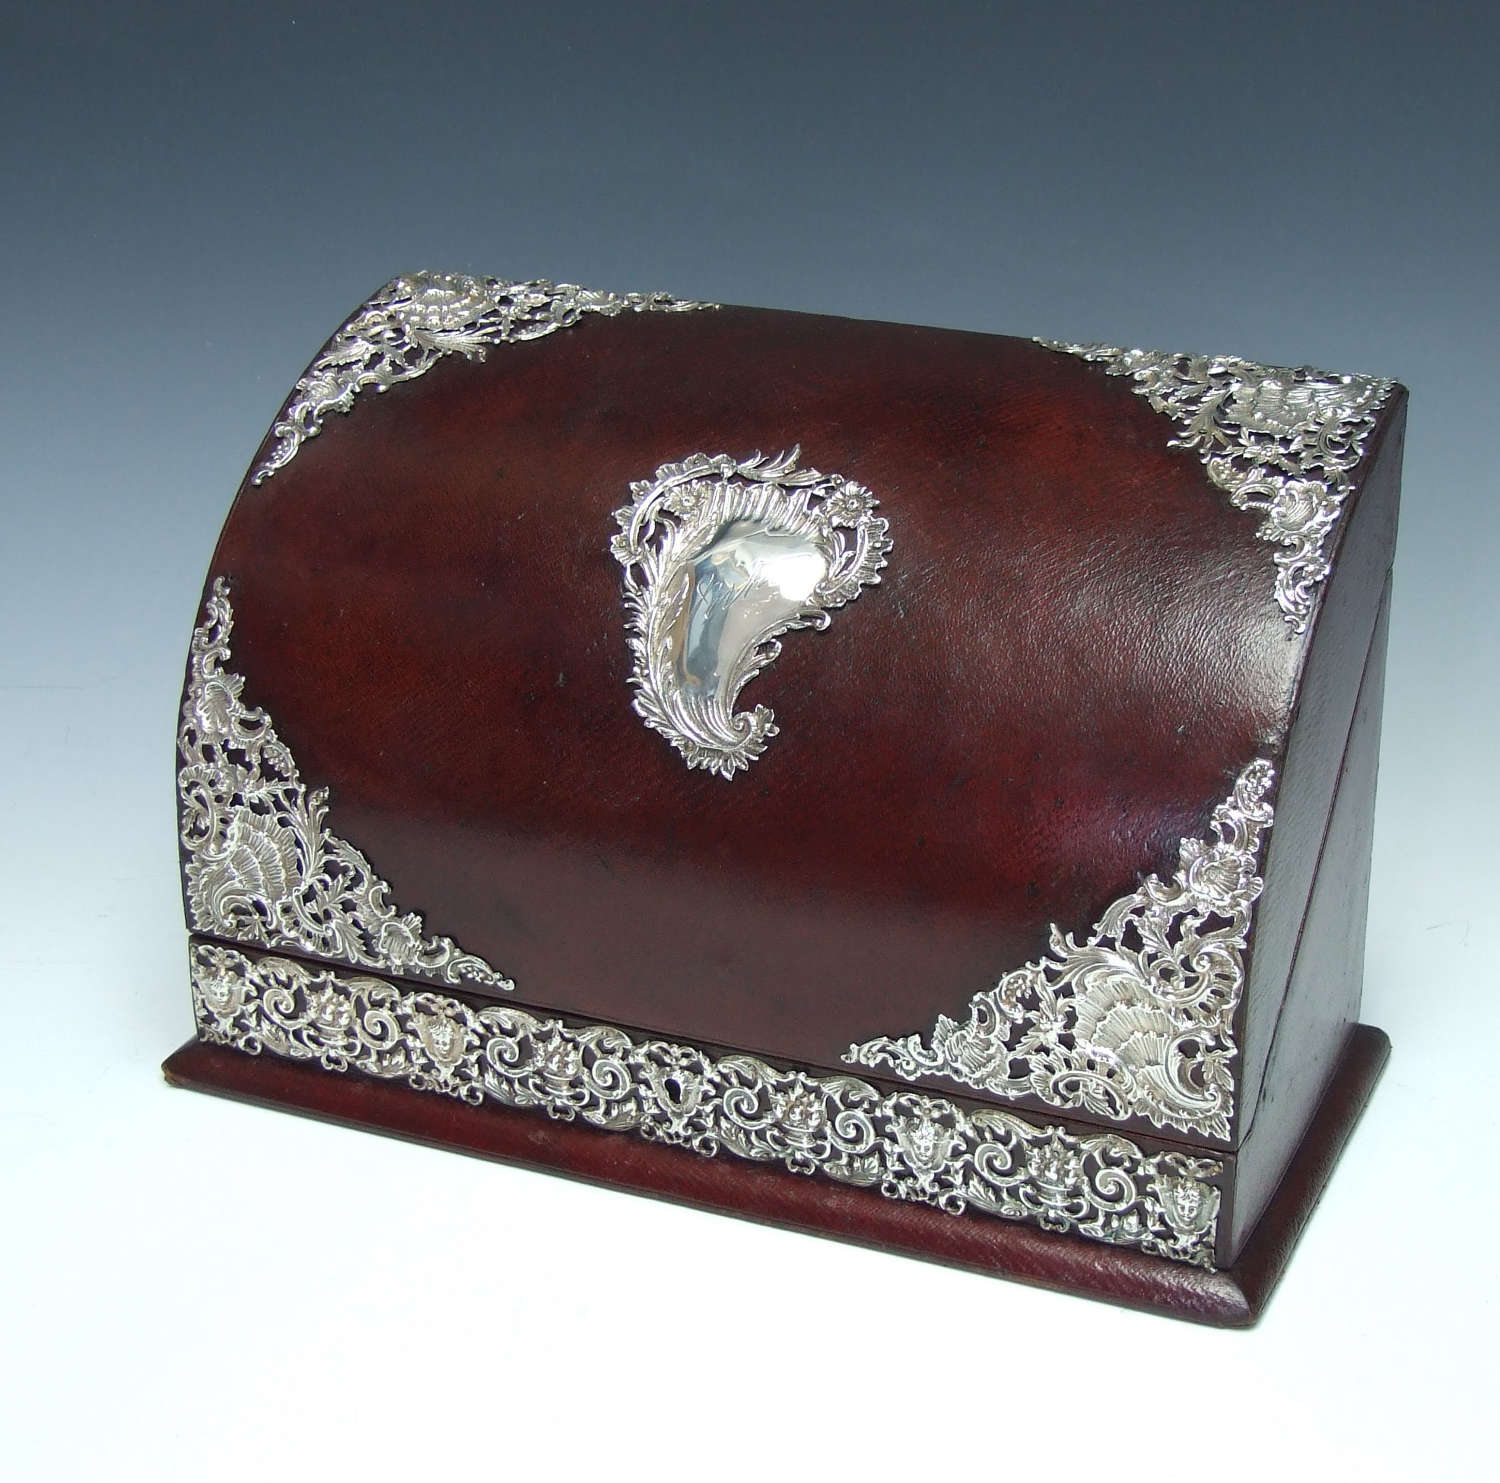 A lovely silver and leather domed stationery box.